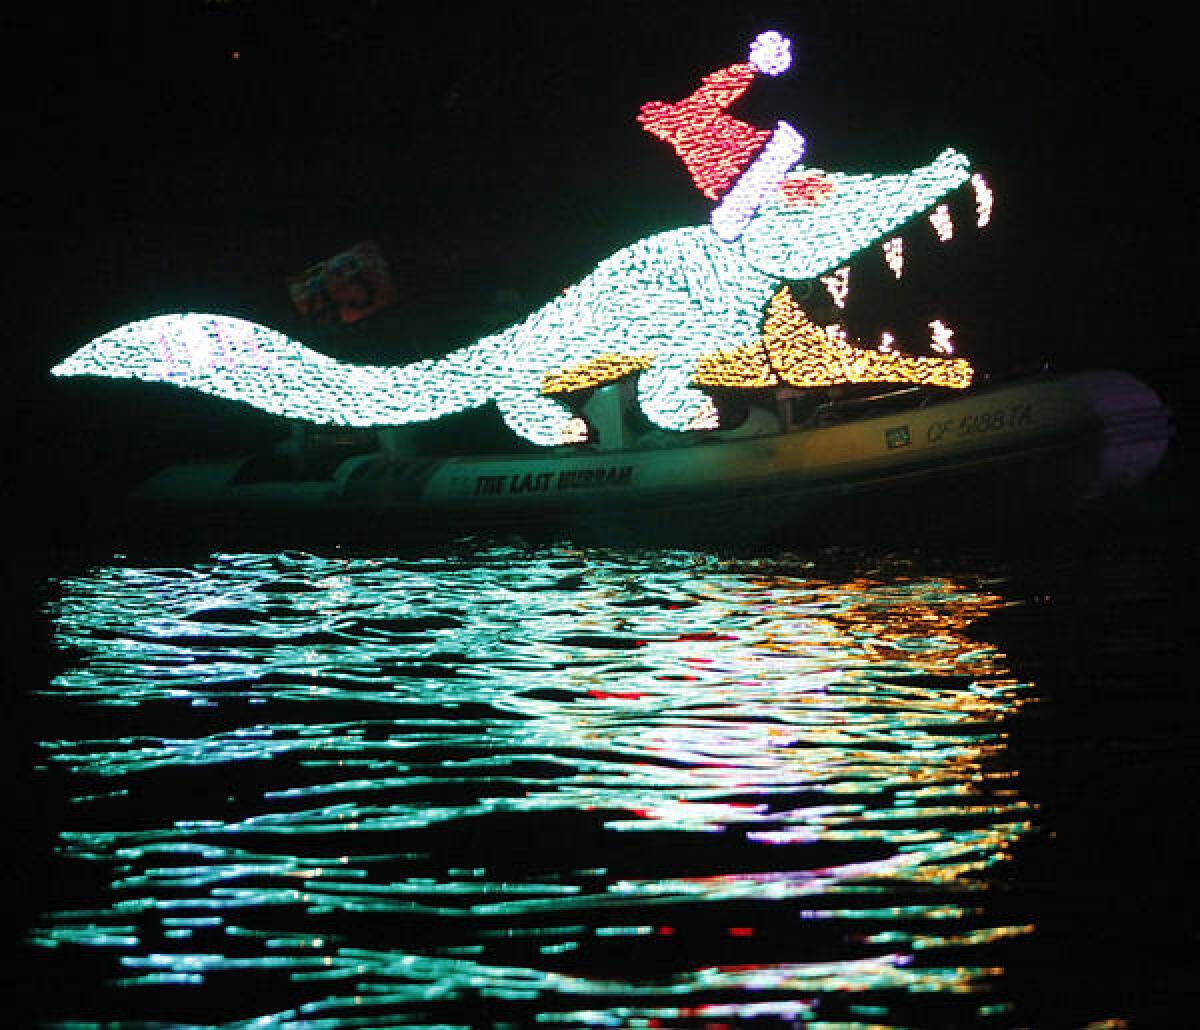 A crocodile flows behind The Last Hurrah, by J. Roberts and Elizabeth Meadows, during the 103rd annual Newport Beach Christmas Boat Parade in 2011.